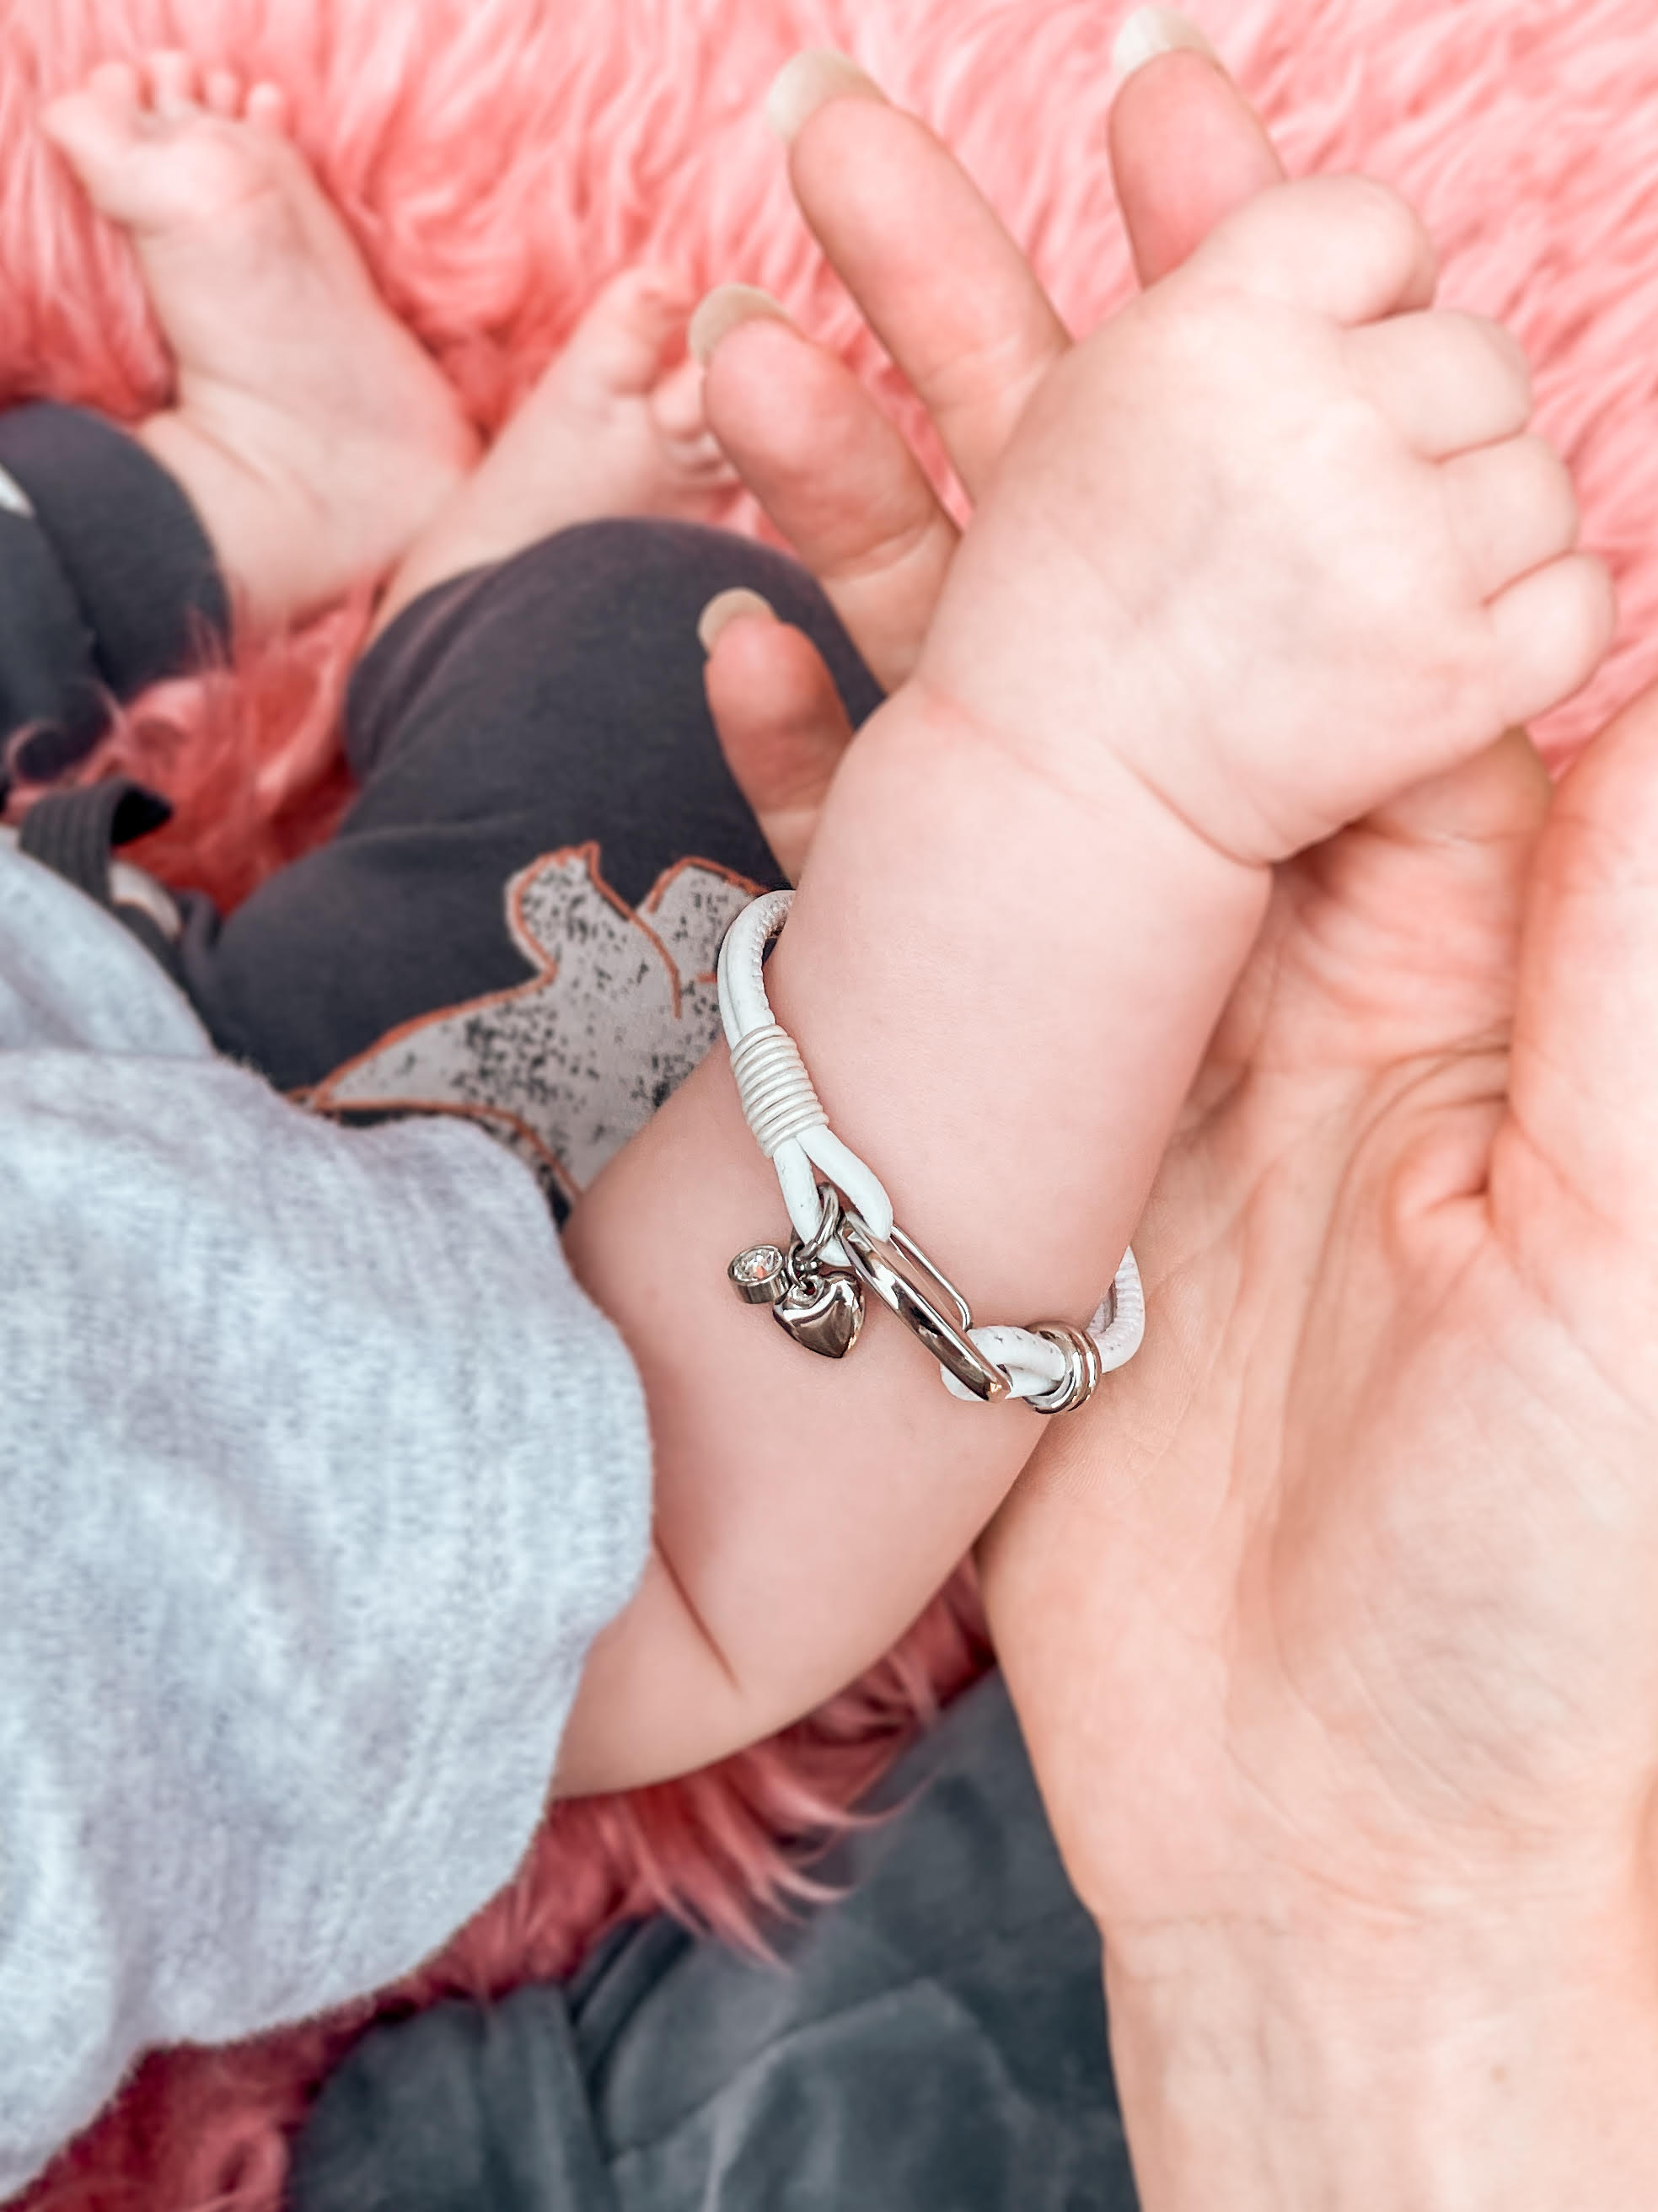 Christening Jewellery Ideas - Unique Gifts for Adults and Little Ones